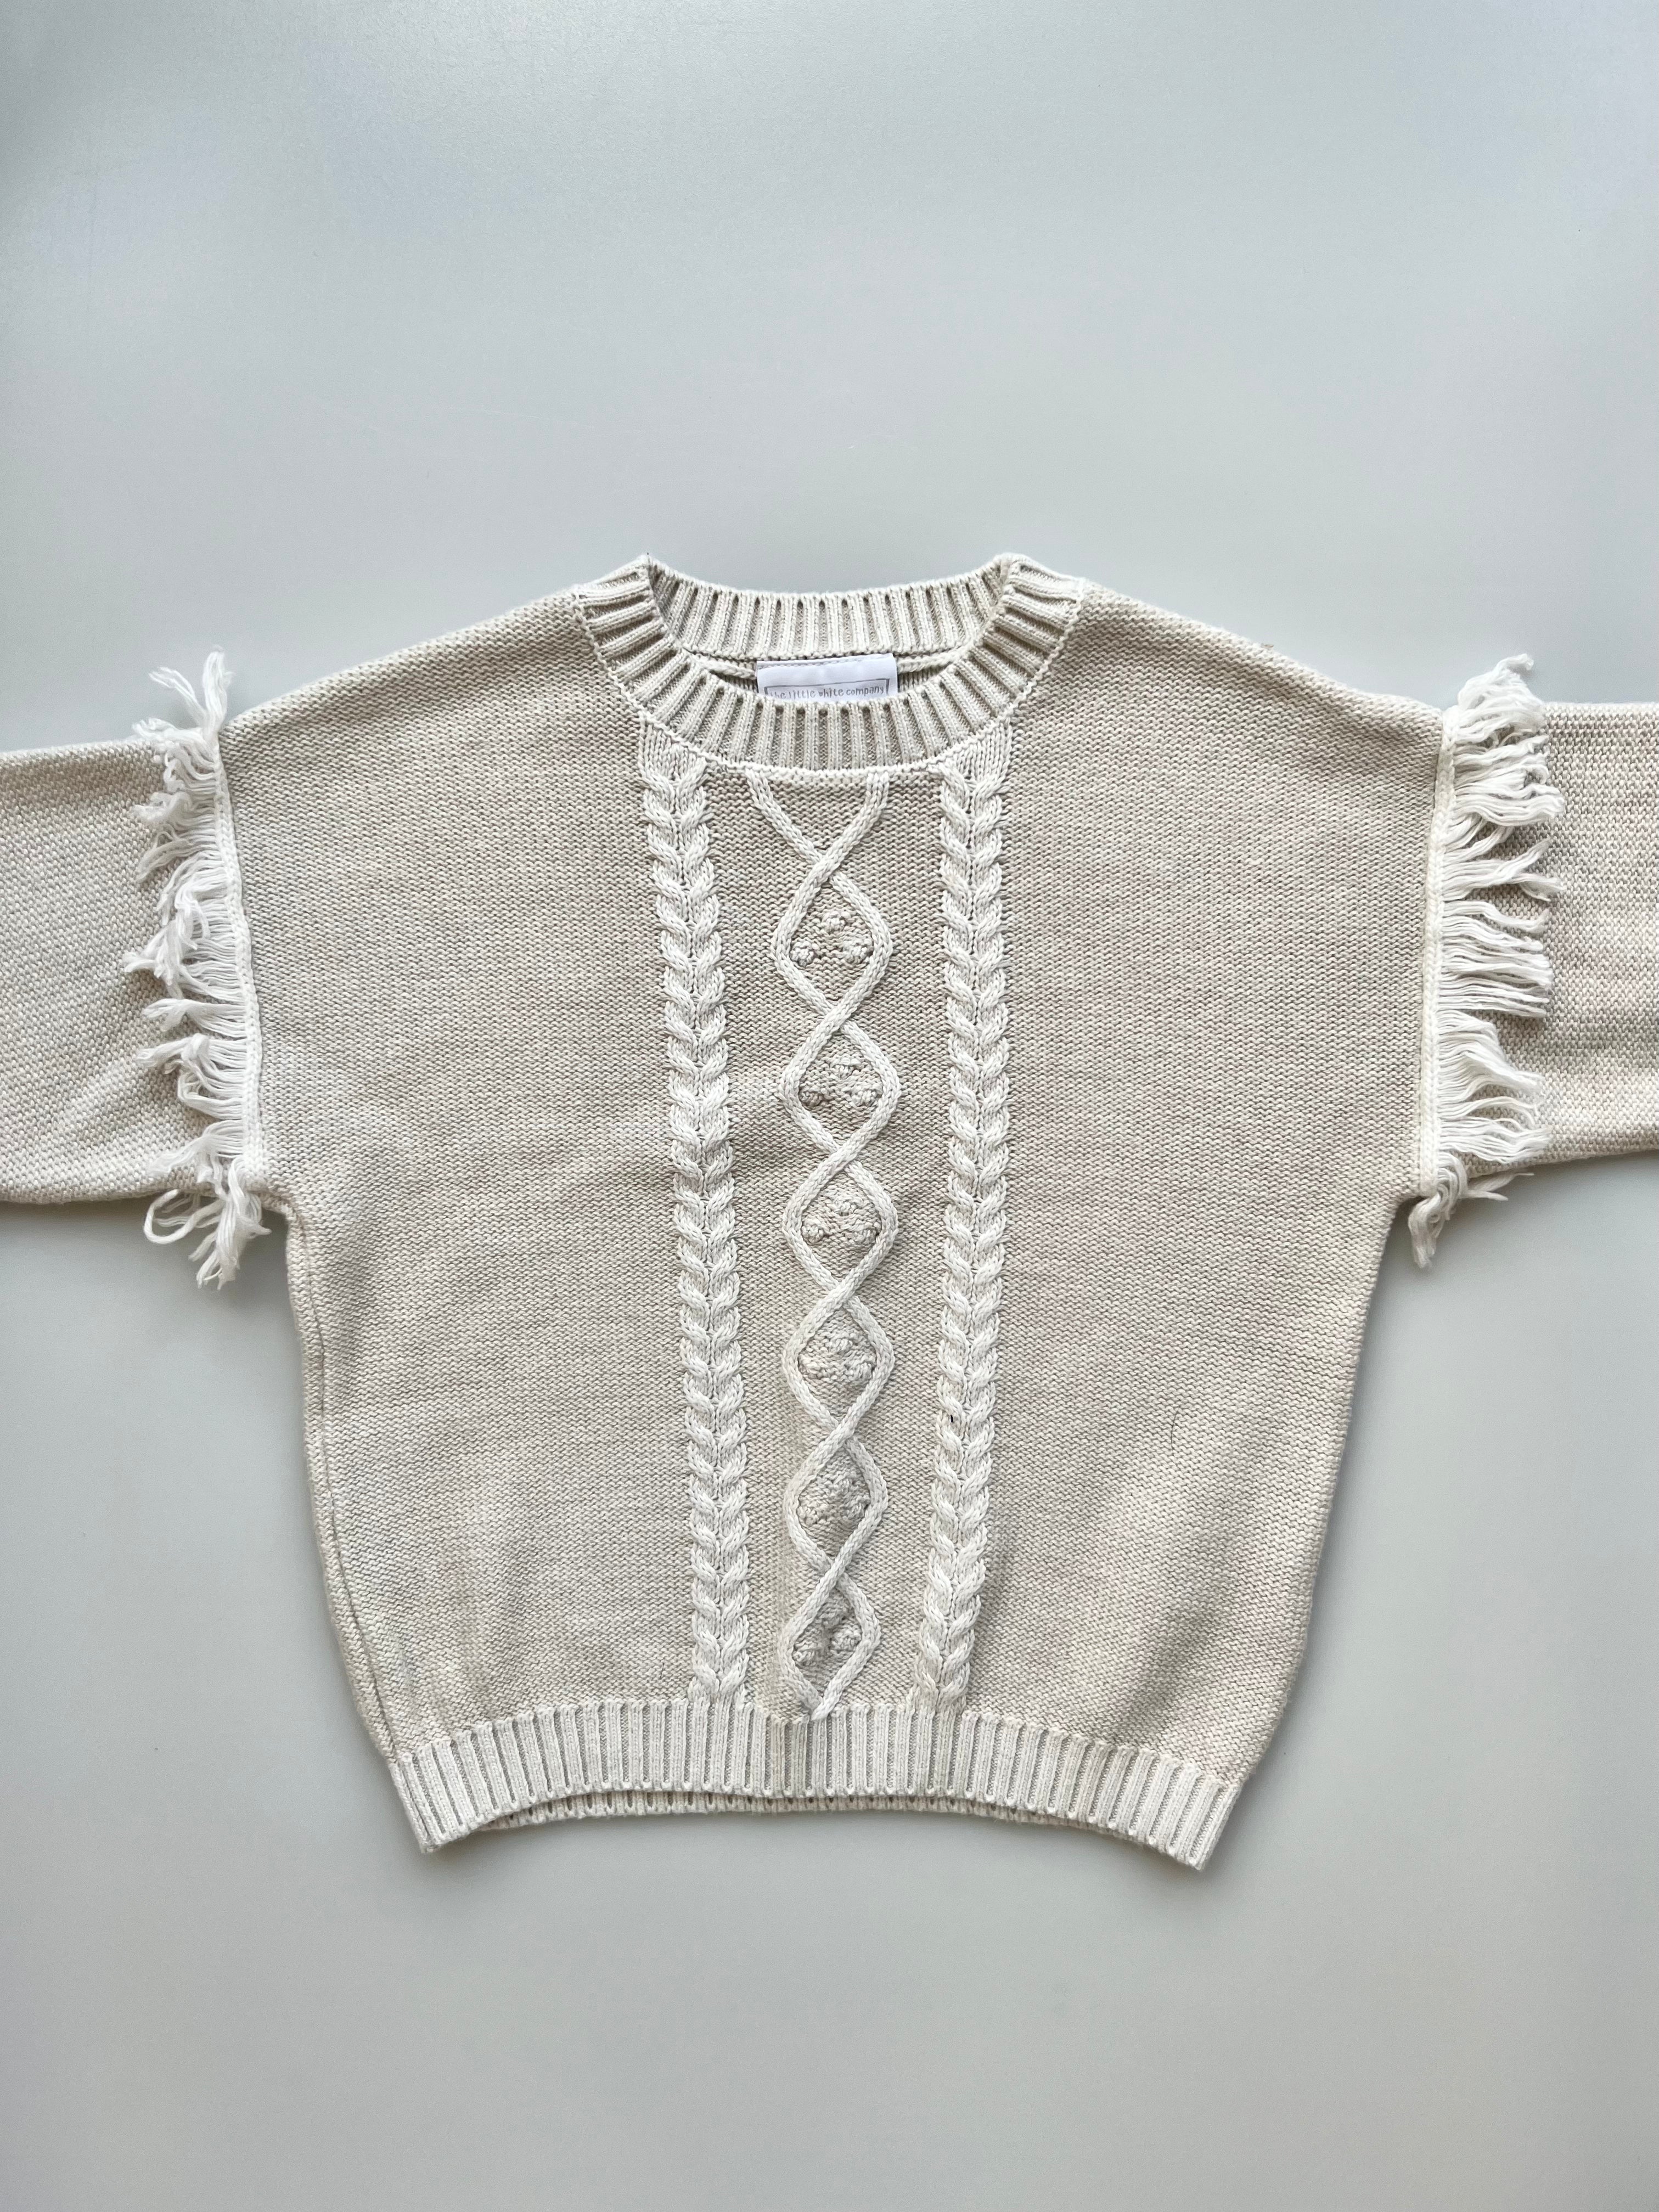 The Little White Company Jumper Age 5-6